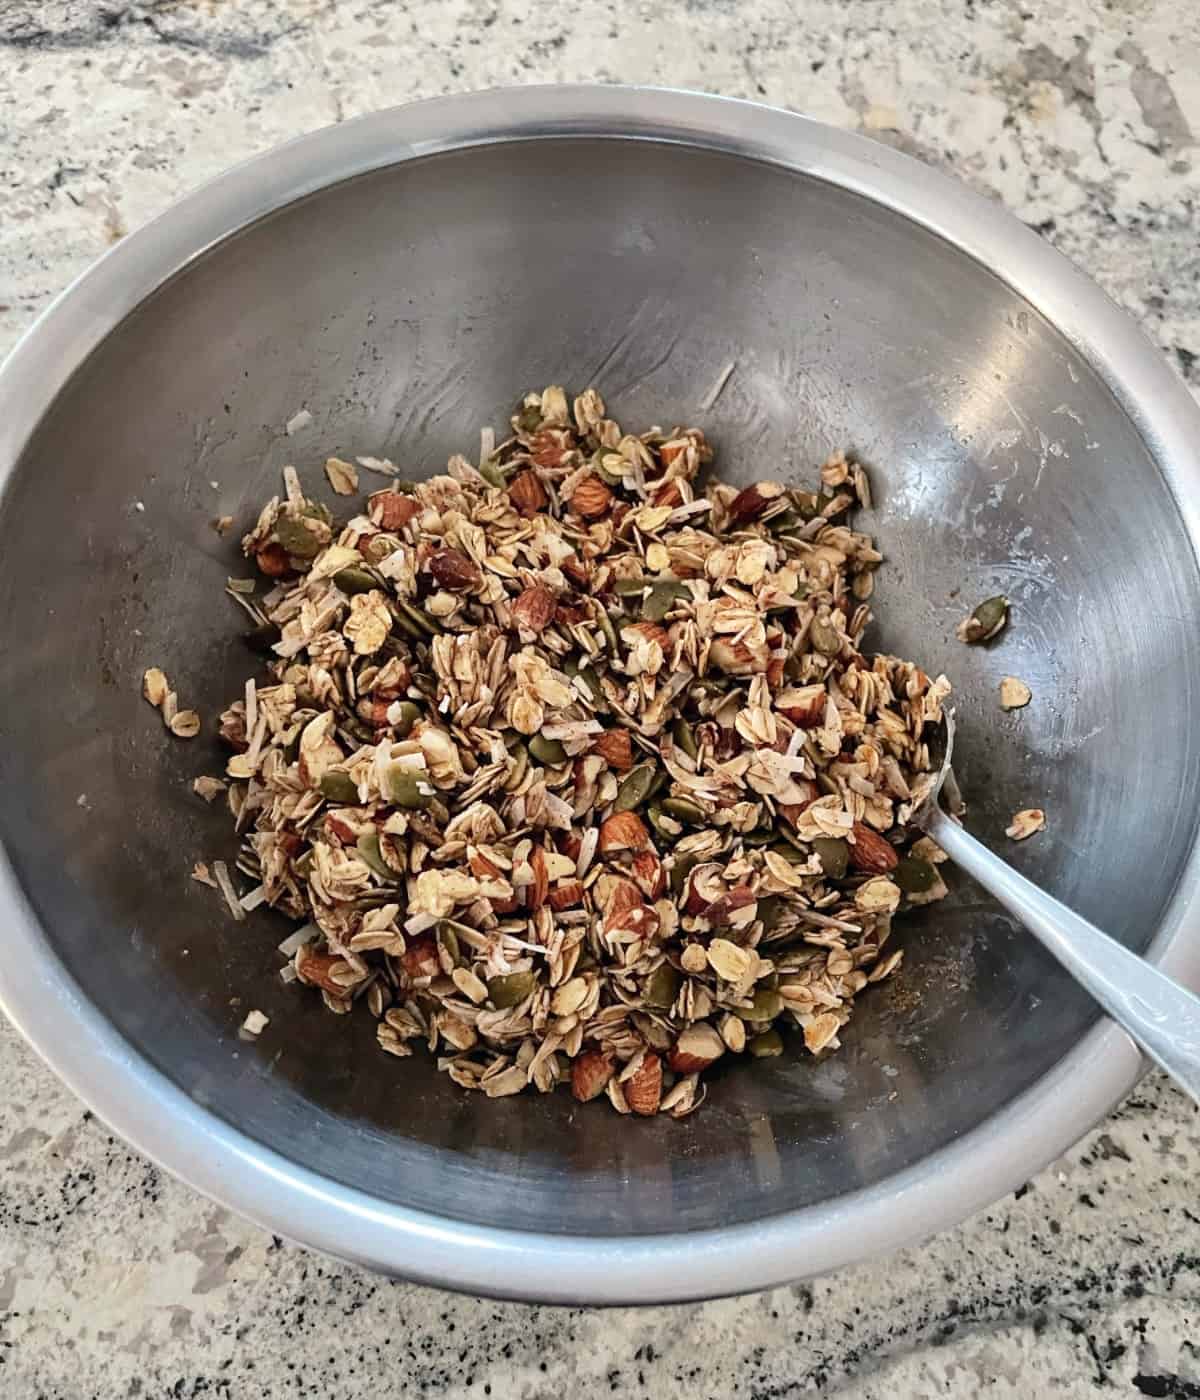 Stirring together rolled oats, chopped almonds, shredded coconut, pumpkin seeds (pepitas), coconut oil, maple syrup, ground cinnamon and cardamom in a mixing bowl with spoon.